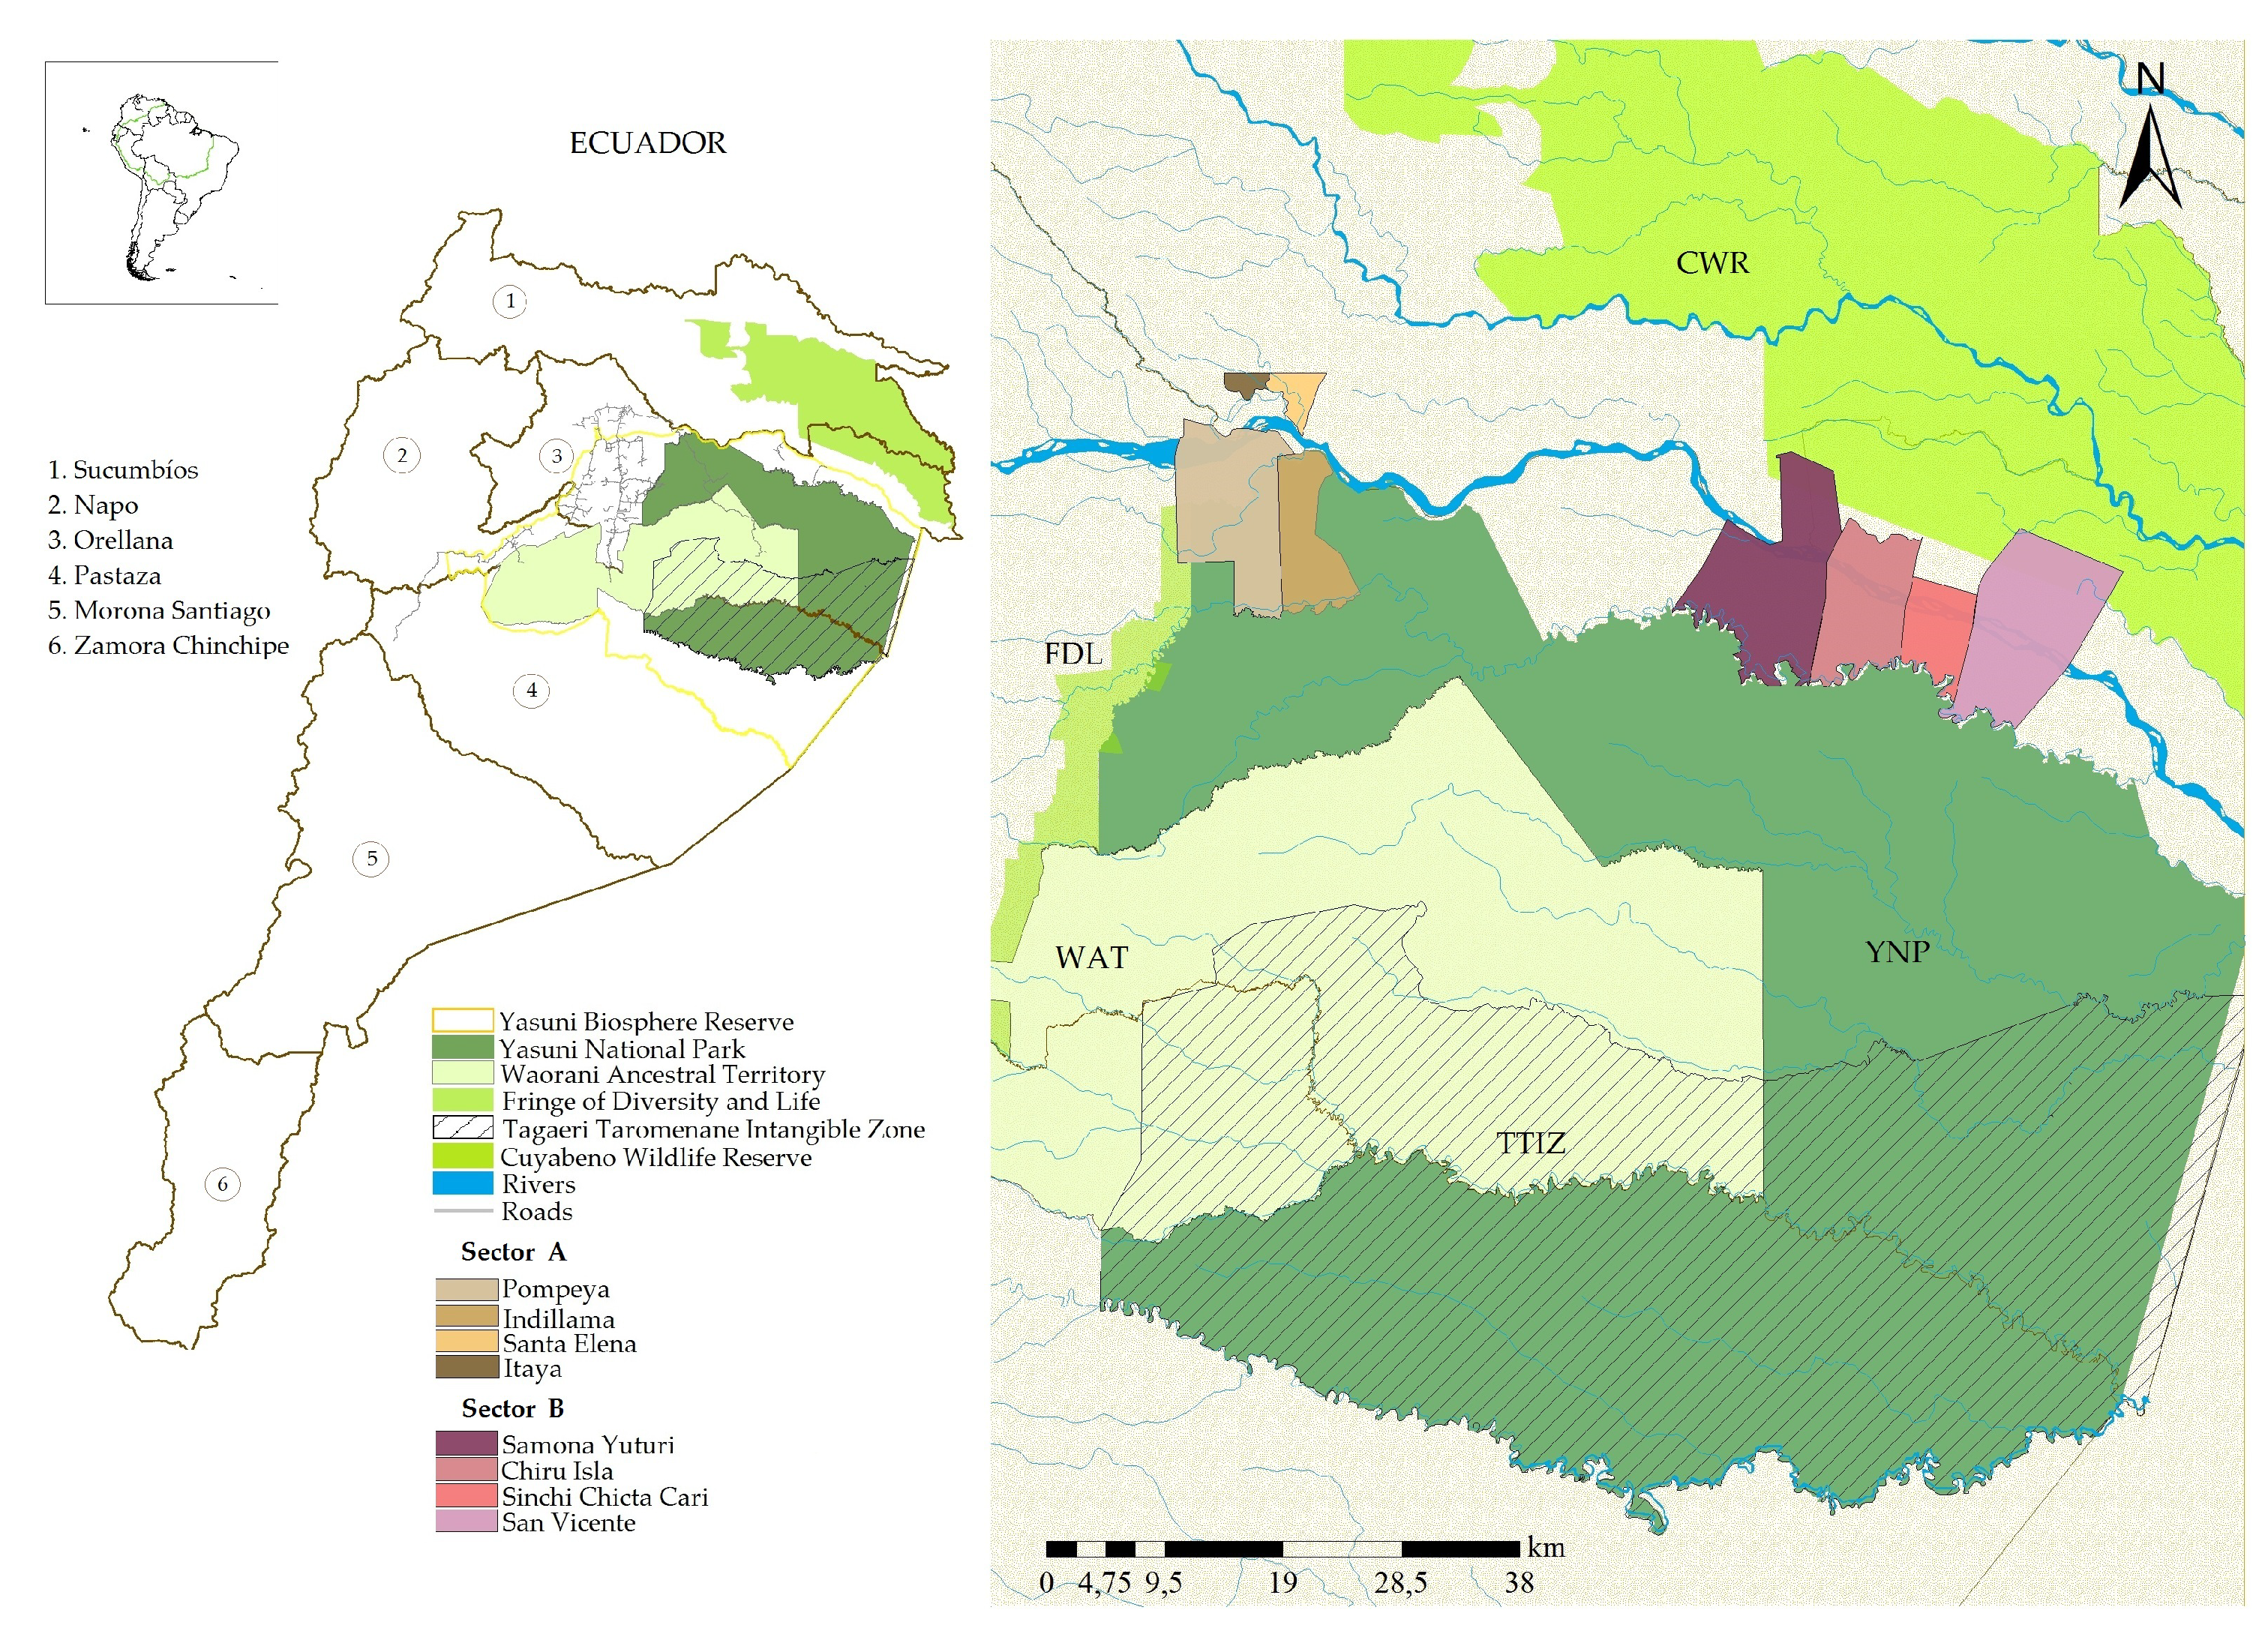 Agronomy Free Full Text Sustainability Assessment Of Smallholder Agroforestry Indigenous Farming In The Amazon A Case Study Of Ecuadorian Kichwas Html